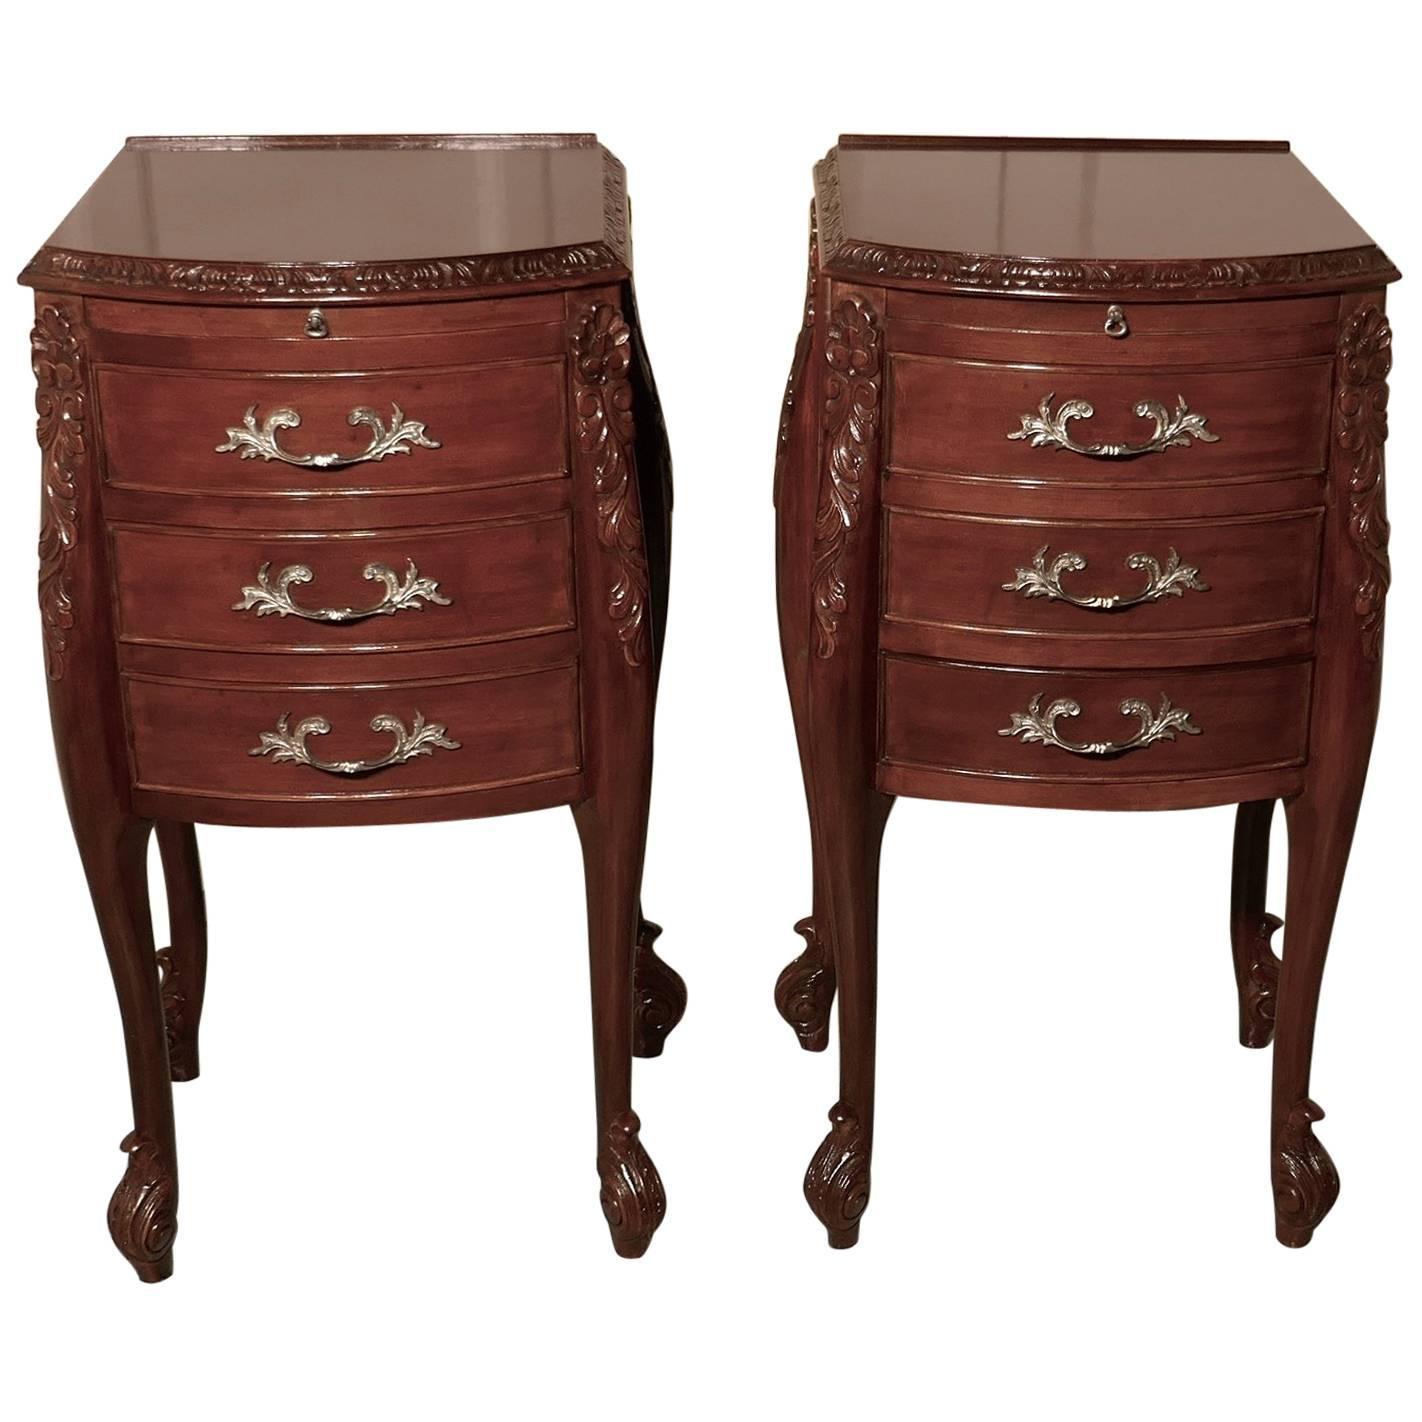 Pair of French Walnut and Ormolu Three-Drawer Bedside Cabinets